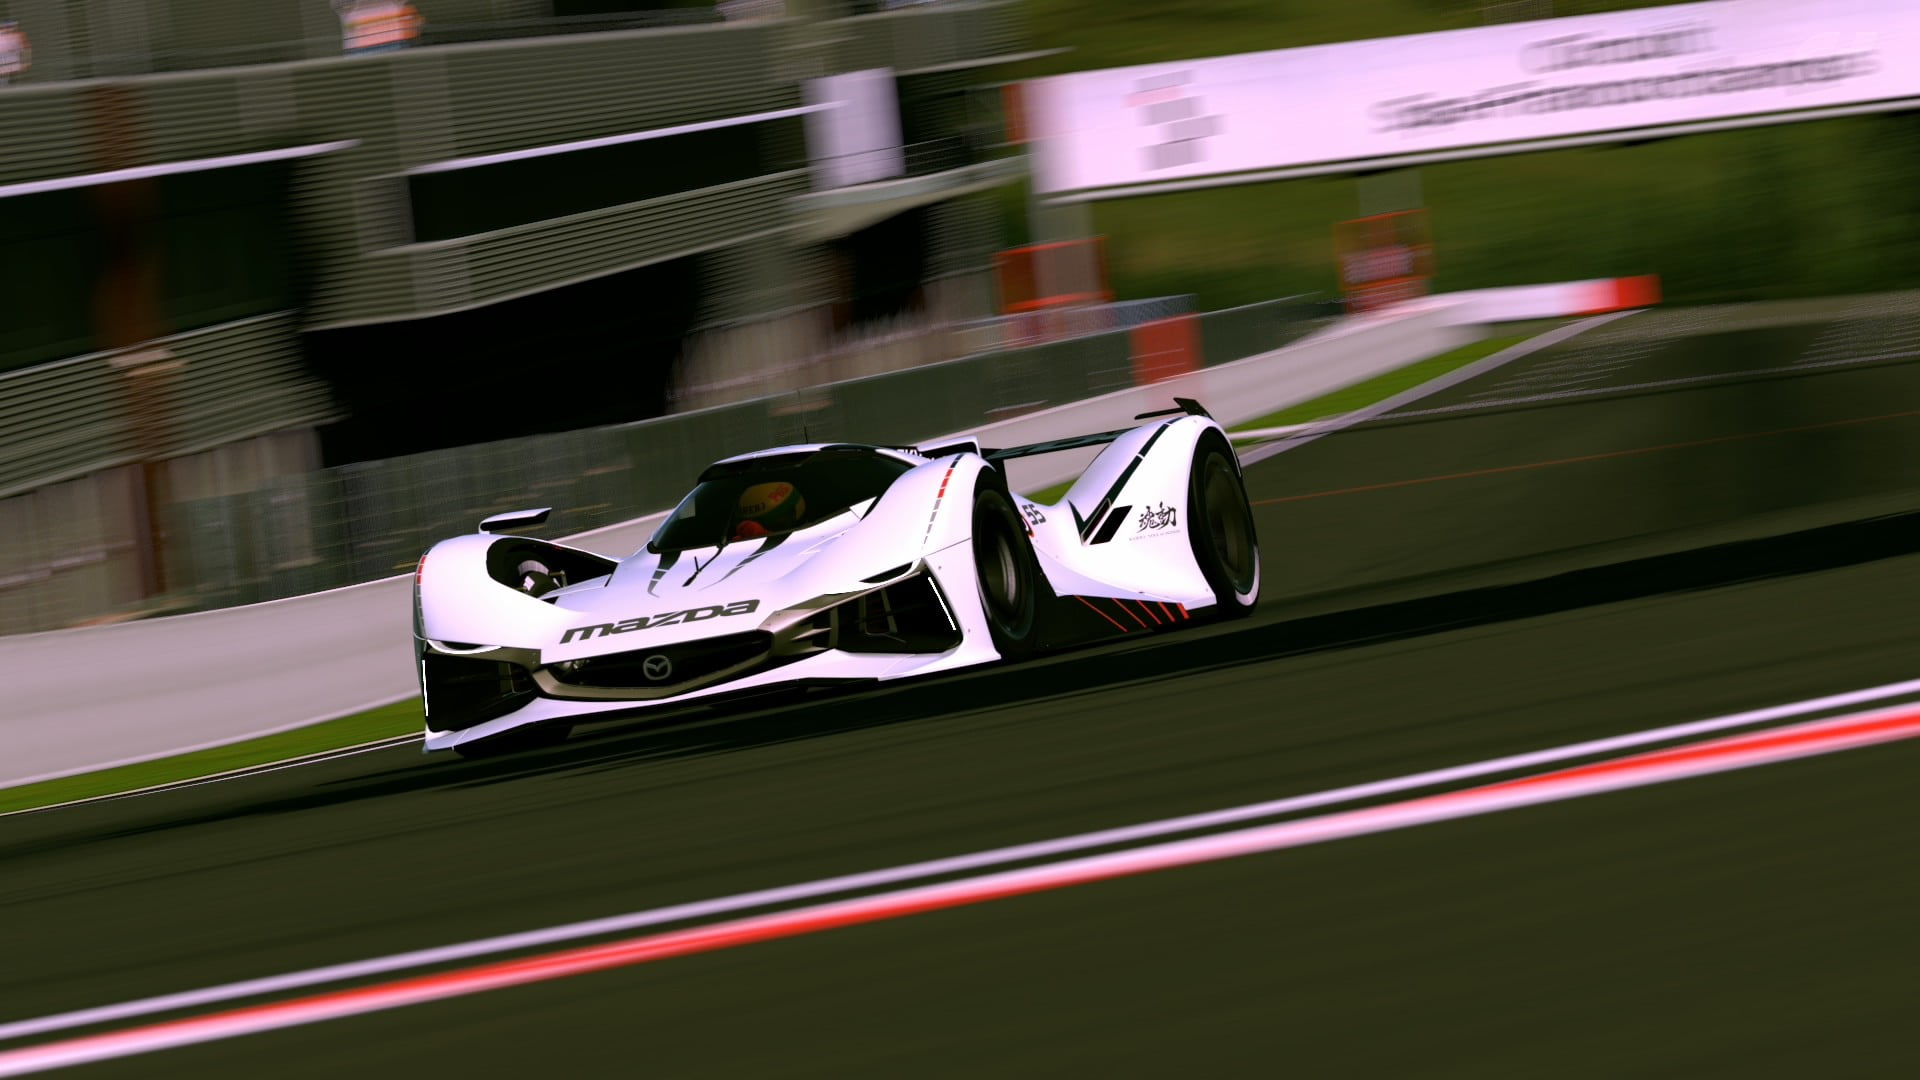 white and black RC car, video games, Mazda LM55 Vision Gran Turismo, Gran Turismo 6, Gran Turismo